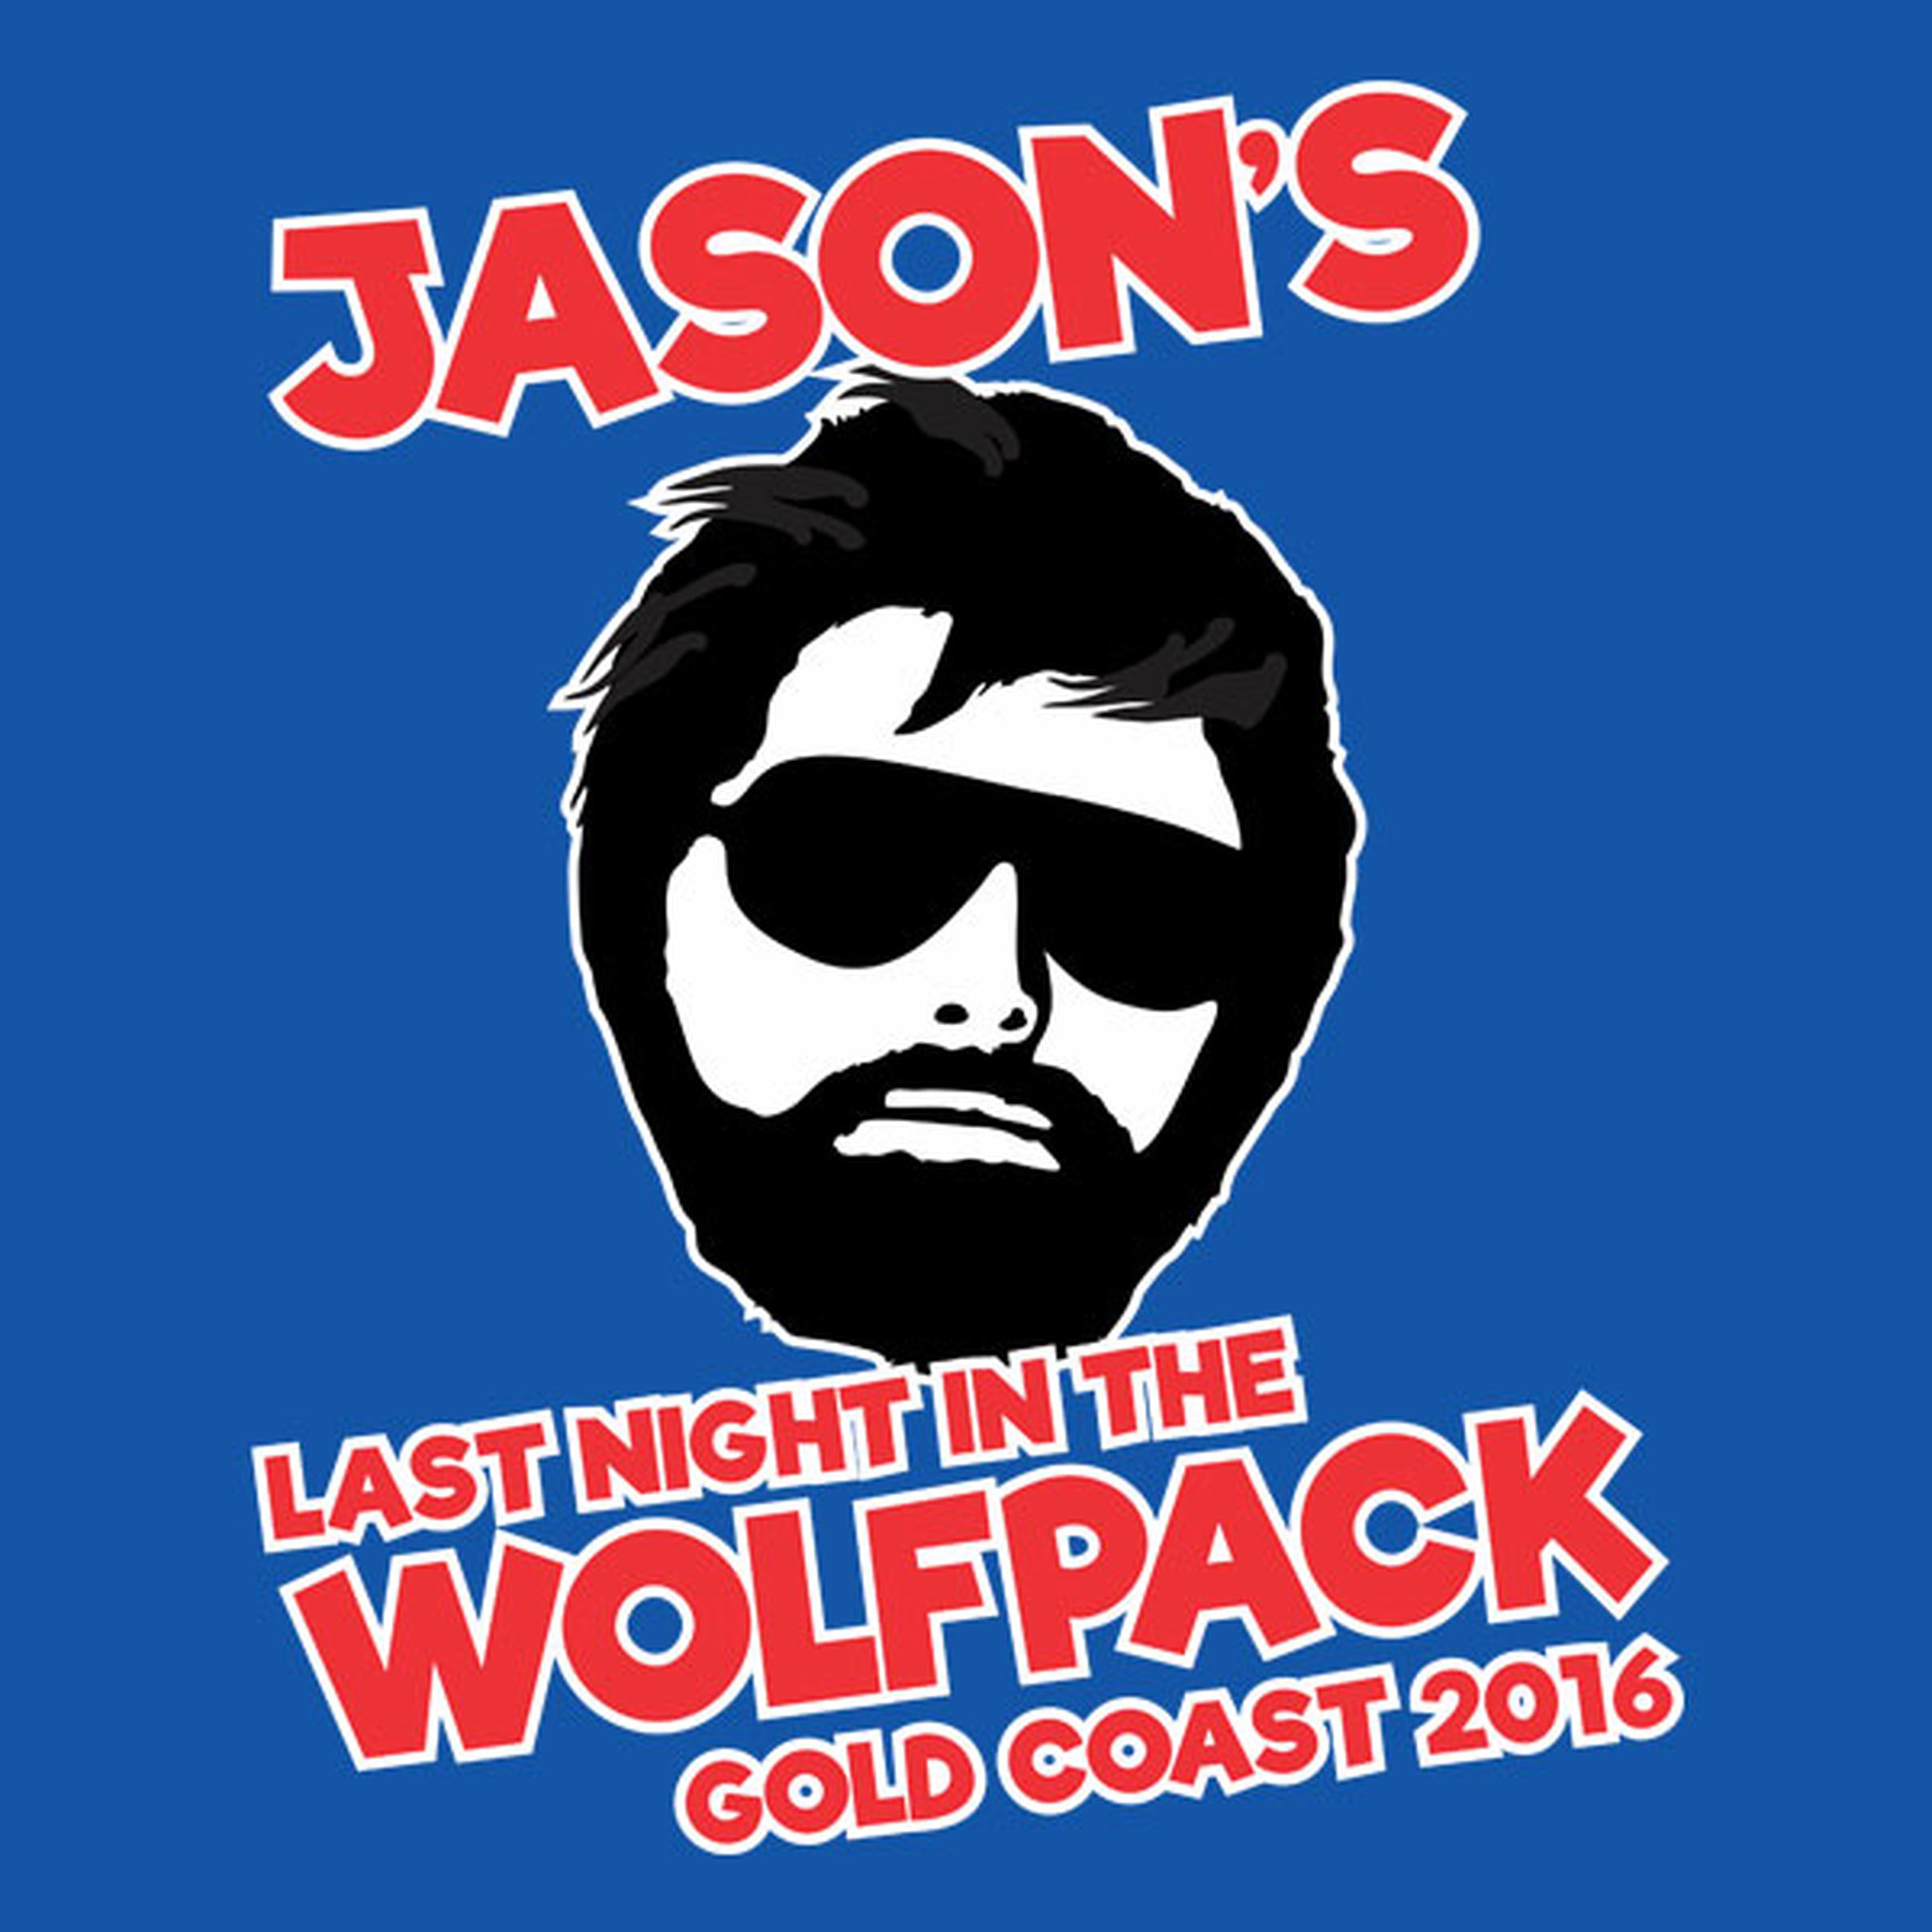 Last night in the wolfpack - T-shirt